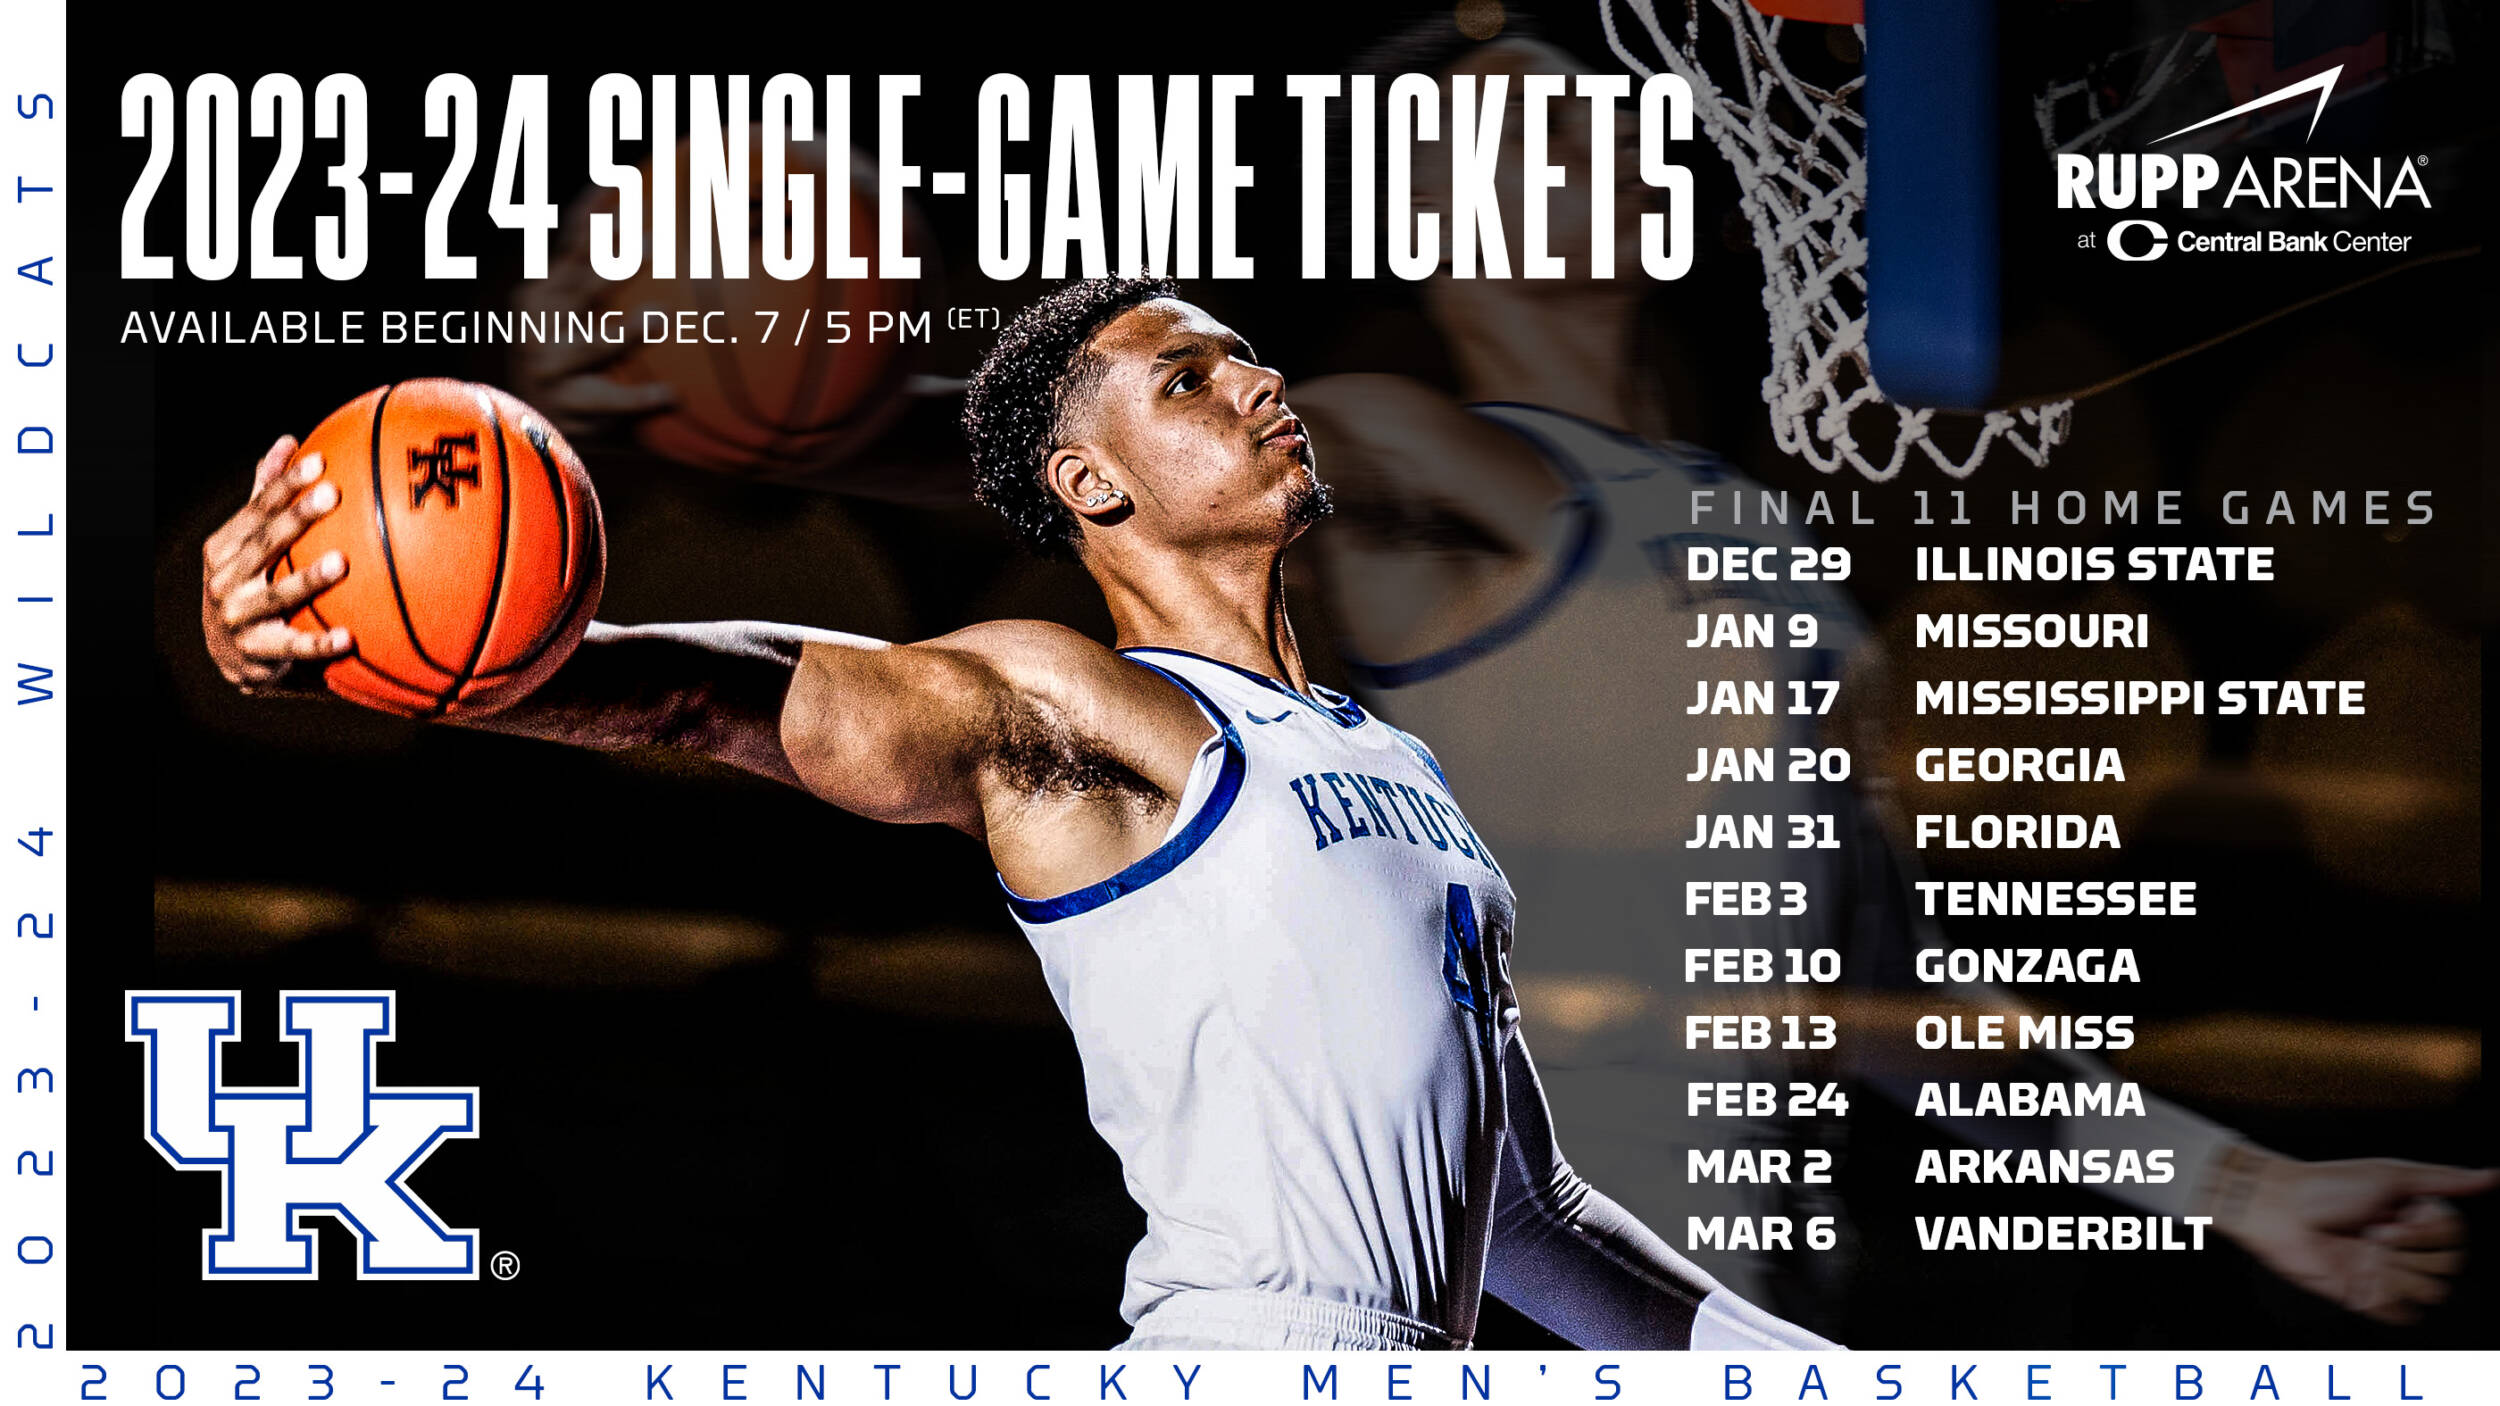 Kentucky Men’s Basketball Single-Game Tickets On Sale Dec. 7 at 5 p.m. ET